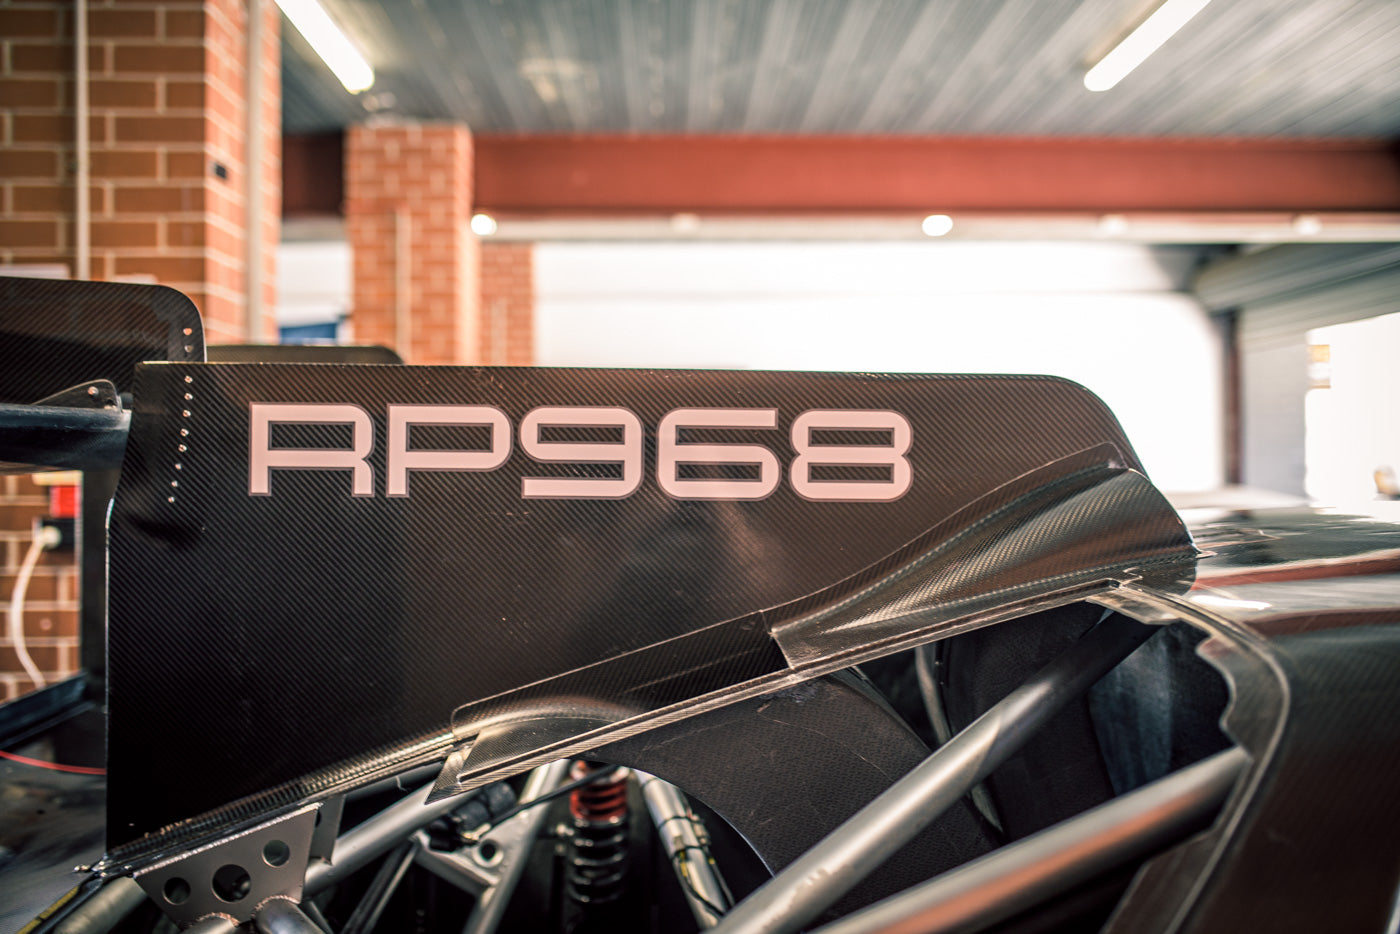 RP968 in 2019 receives ram air roof ducted oil cooler